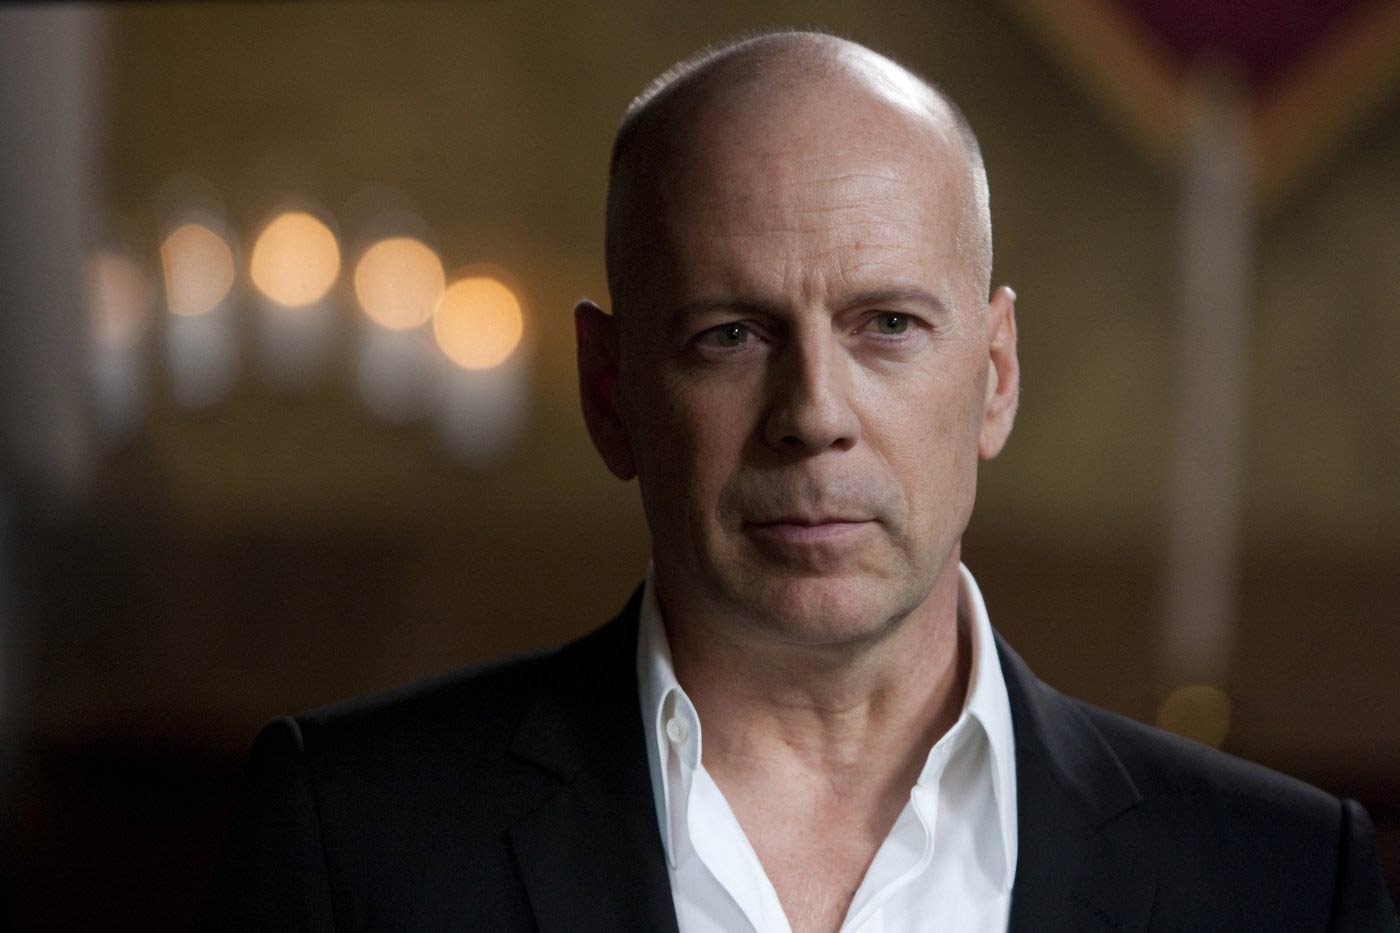 Bruce Willis as Mr. Church in The Expendables, 2010.